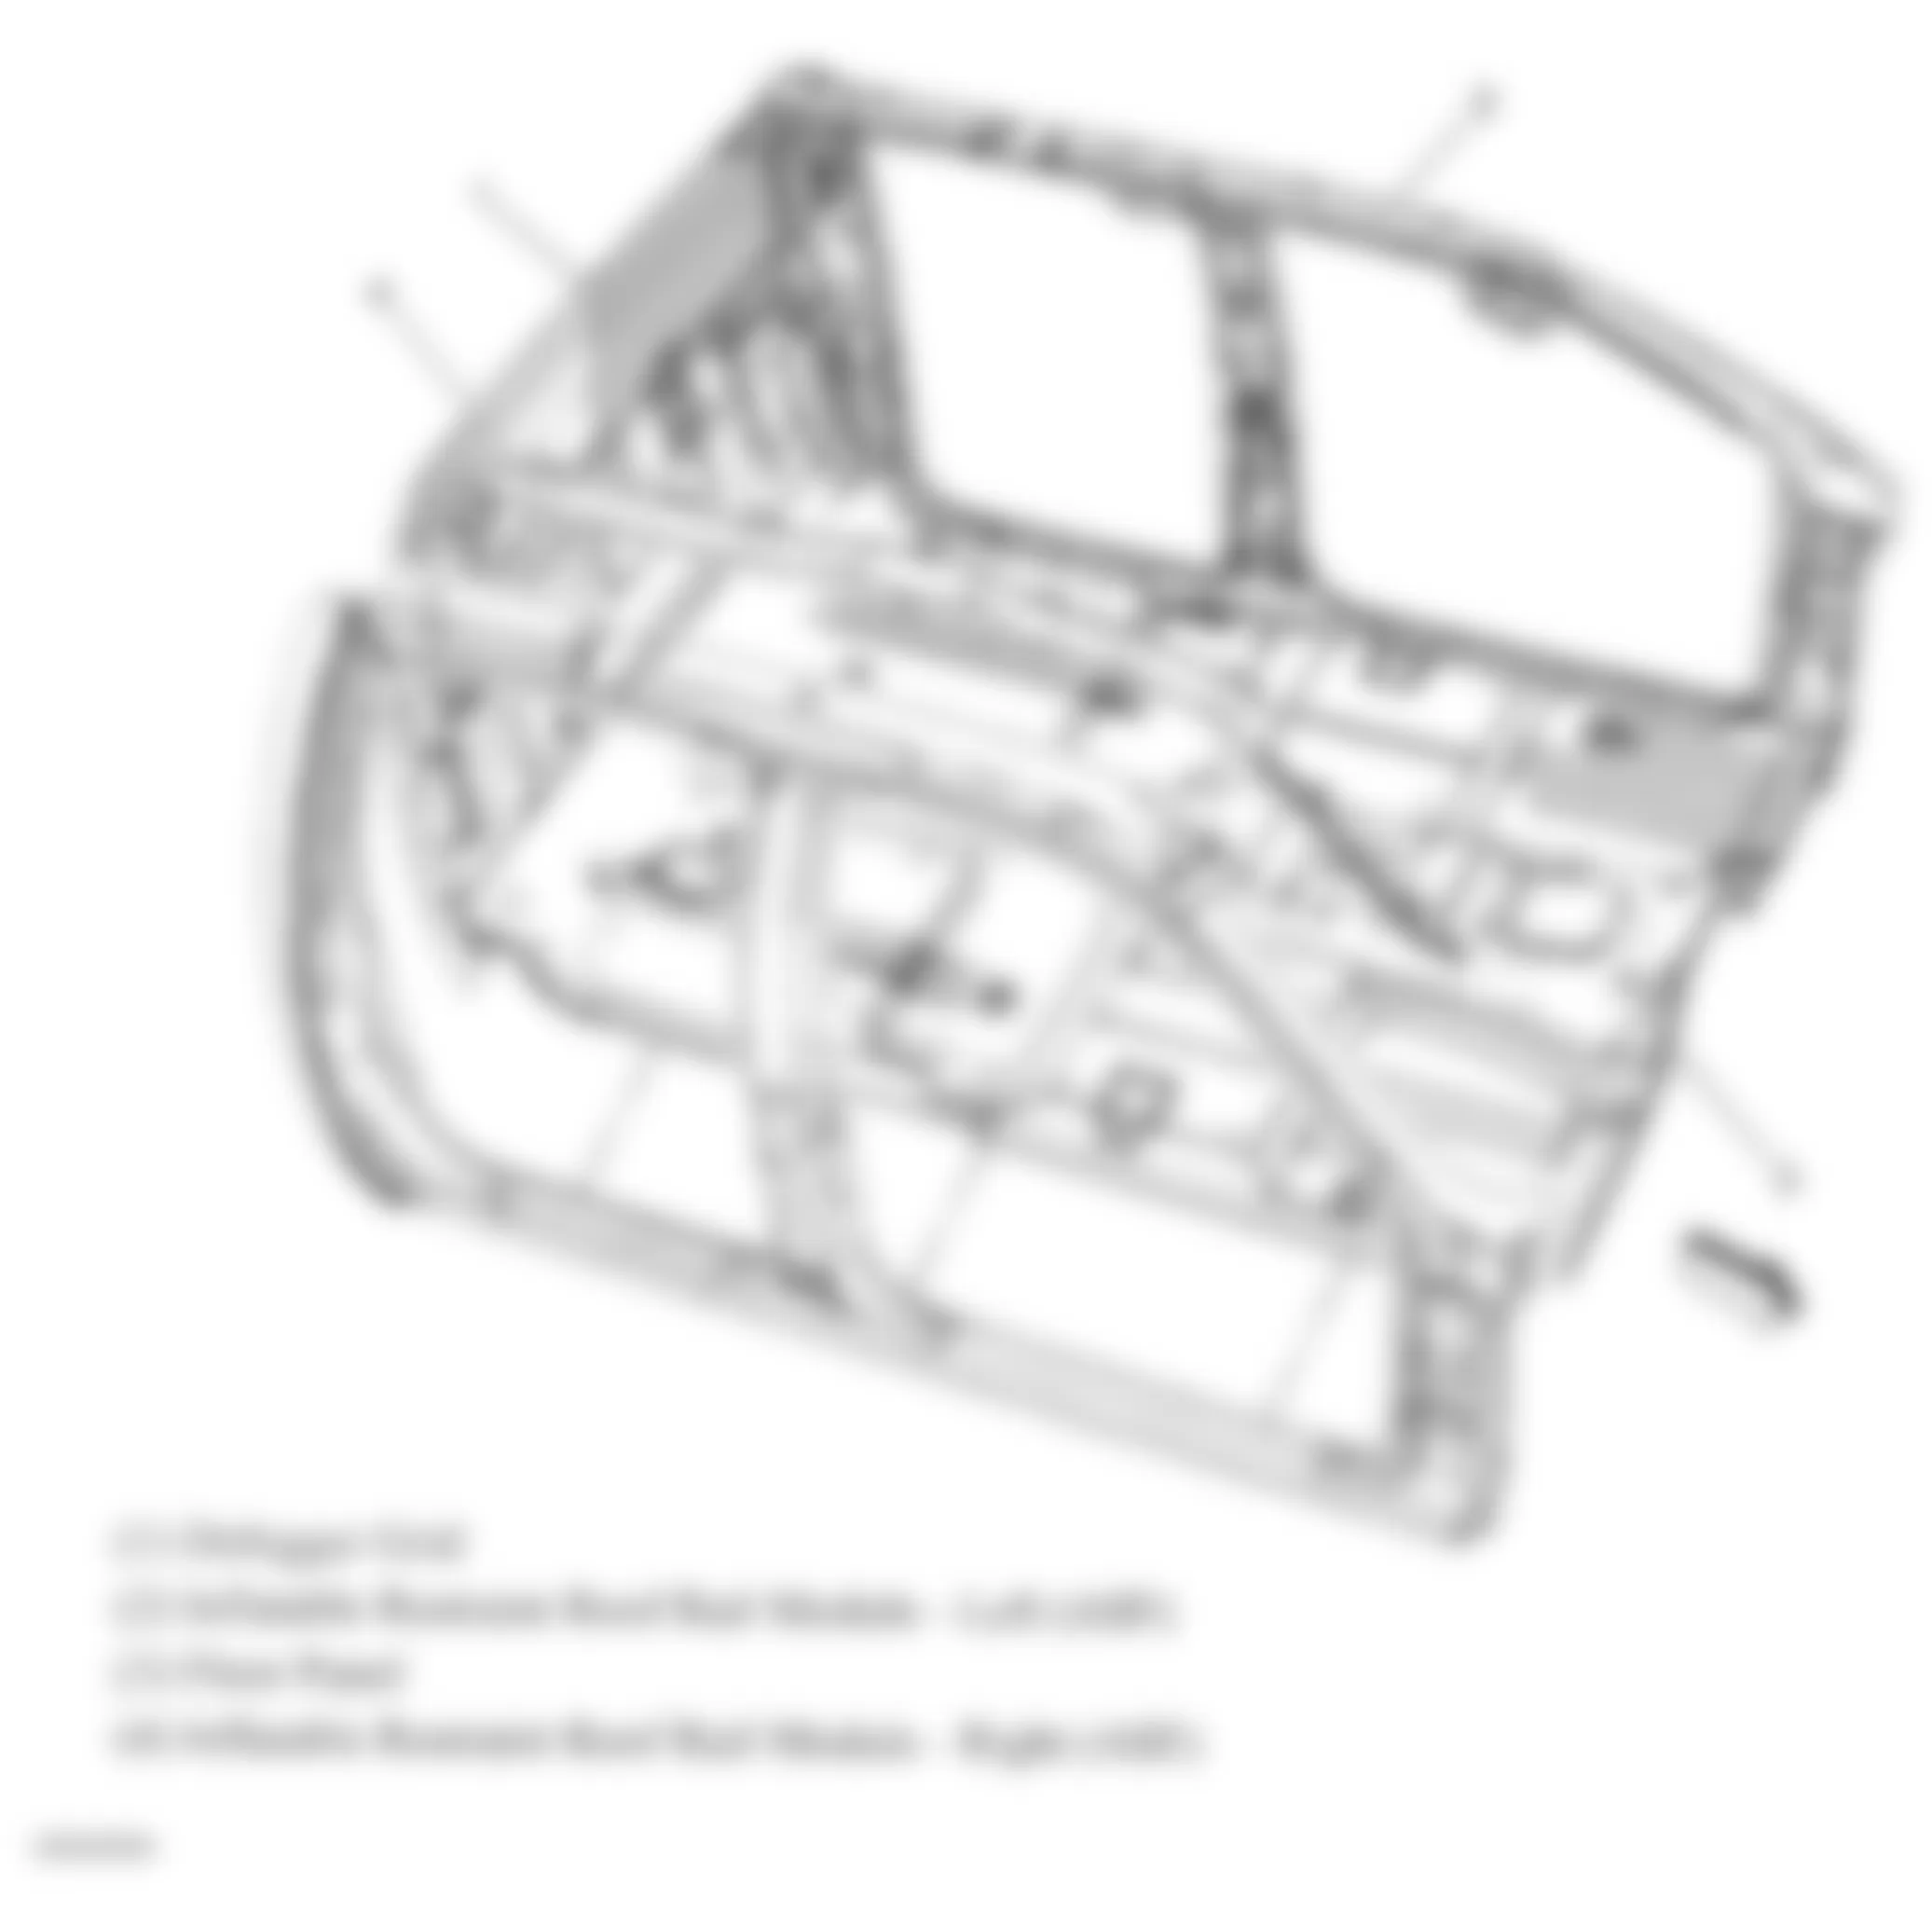 GMC Sierra 2500 HD 2009 - Component Locations -  Roof Rail Air Bags (Extended Cab & Crew Cab)